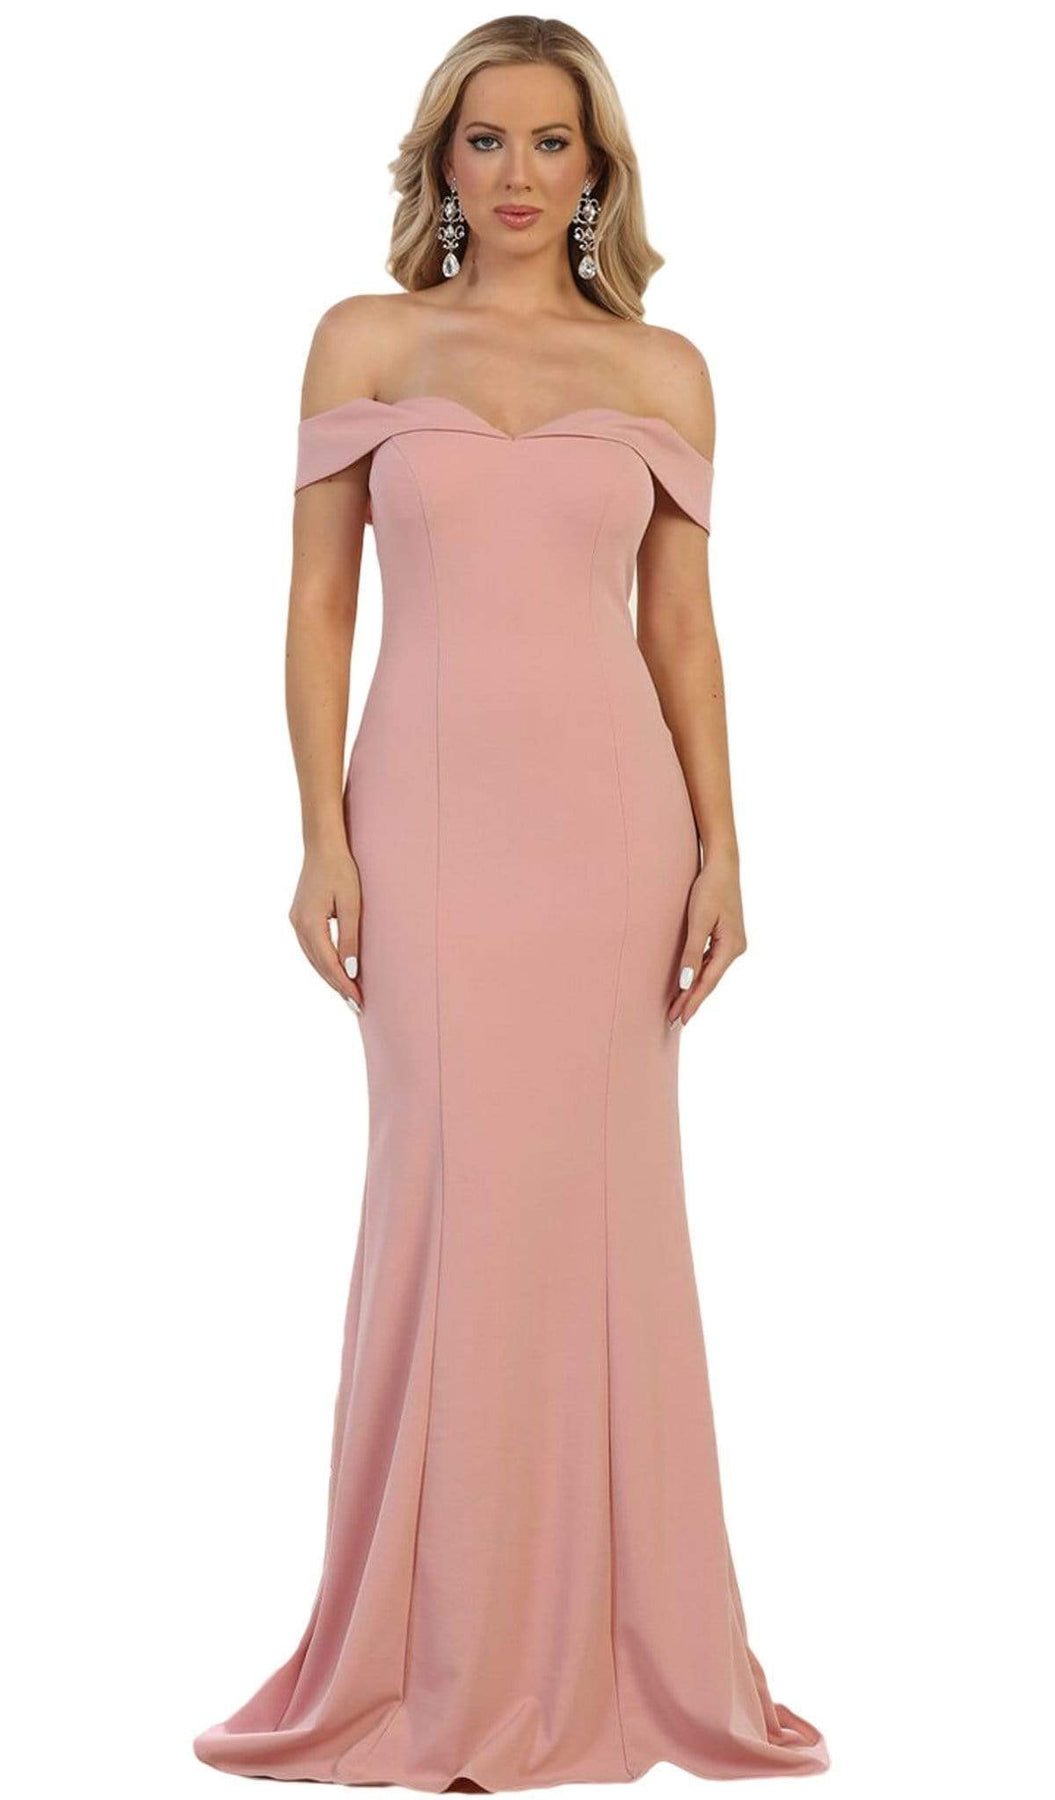 May Queen - Fold over Off-Shoulder Sheath Dress Bridesmaid Dresses 4 / Dusty-Rose